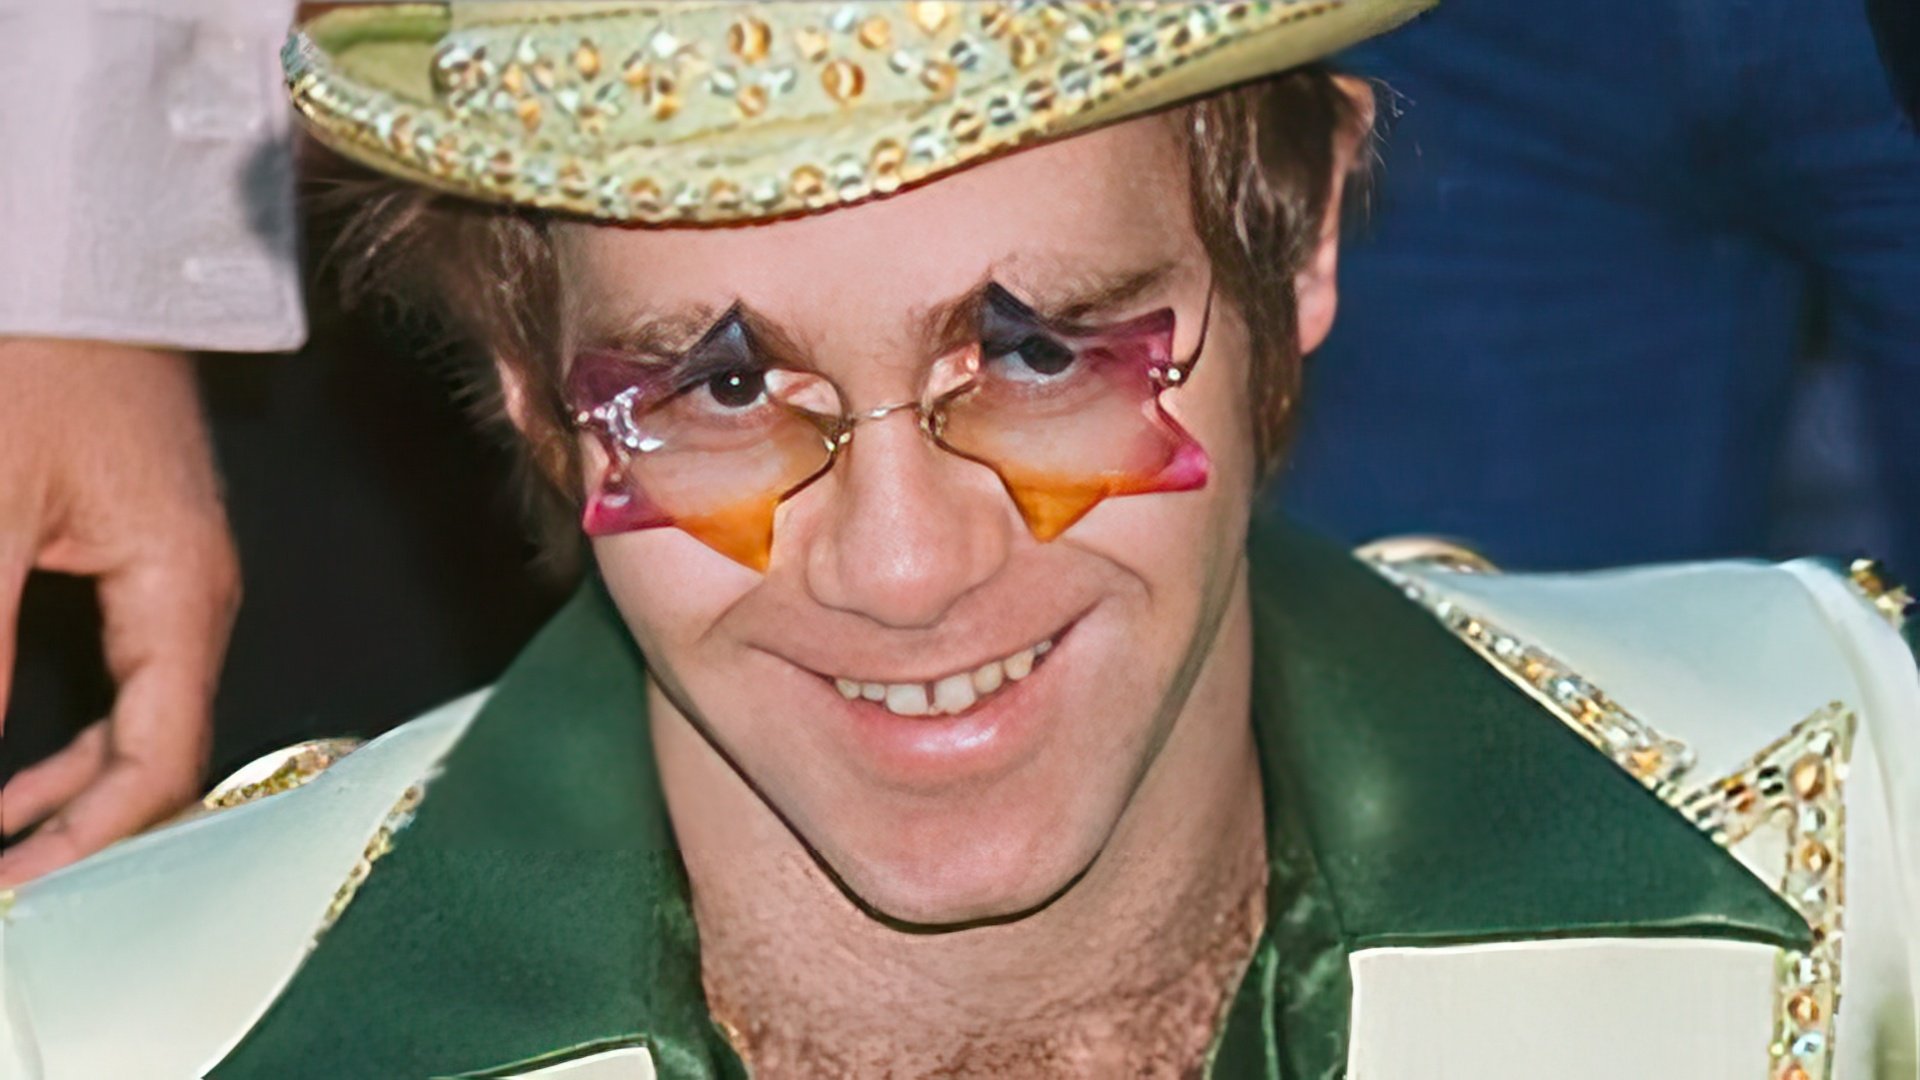 In 1976 Elton John came out as bisexual